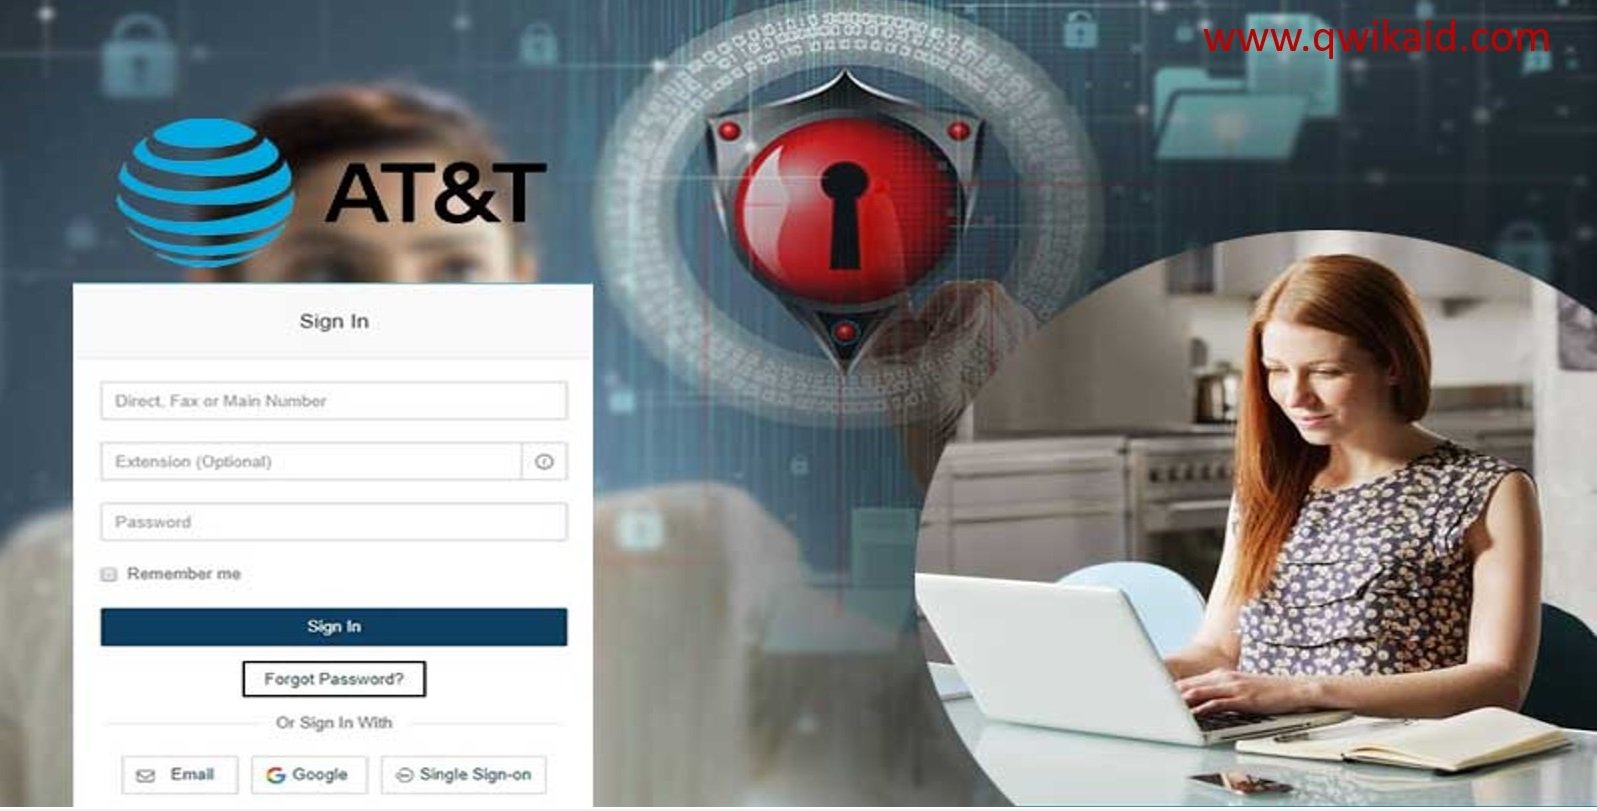 How to Reset or Change AT&T Email Password with easy steps?